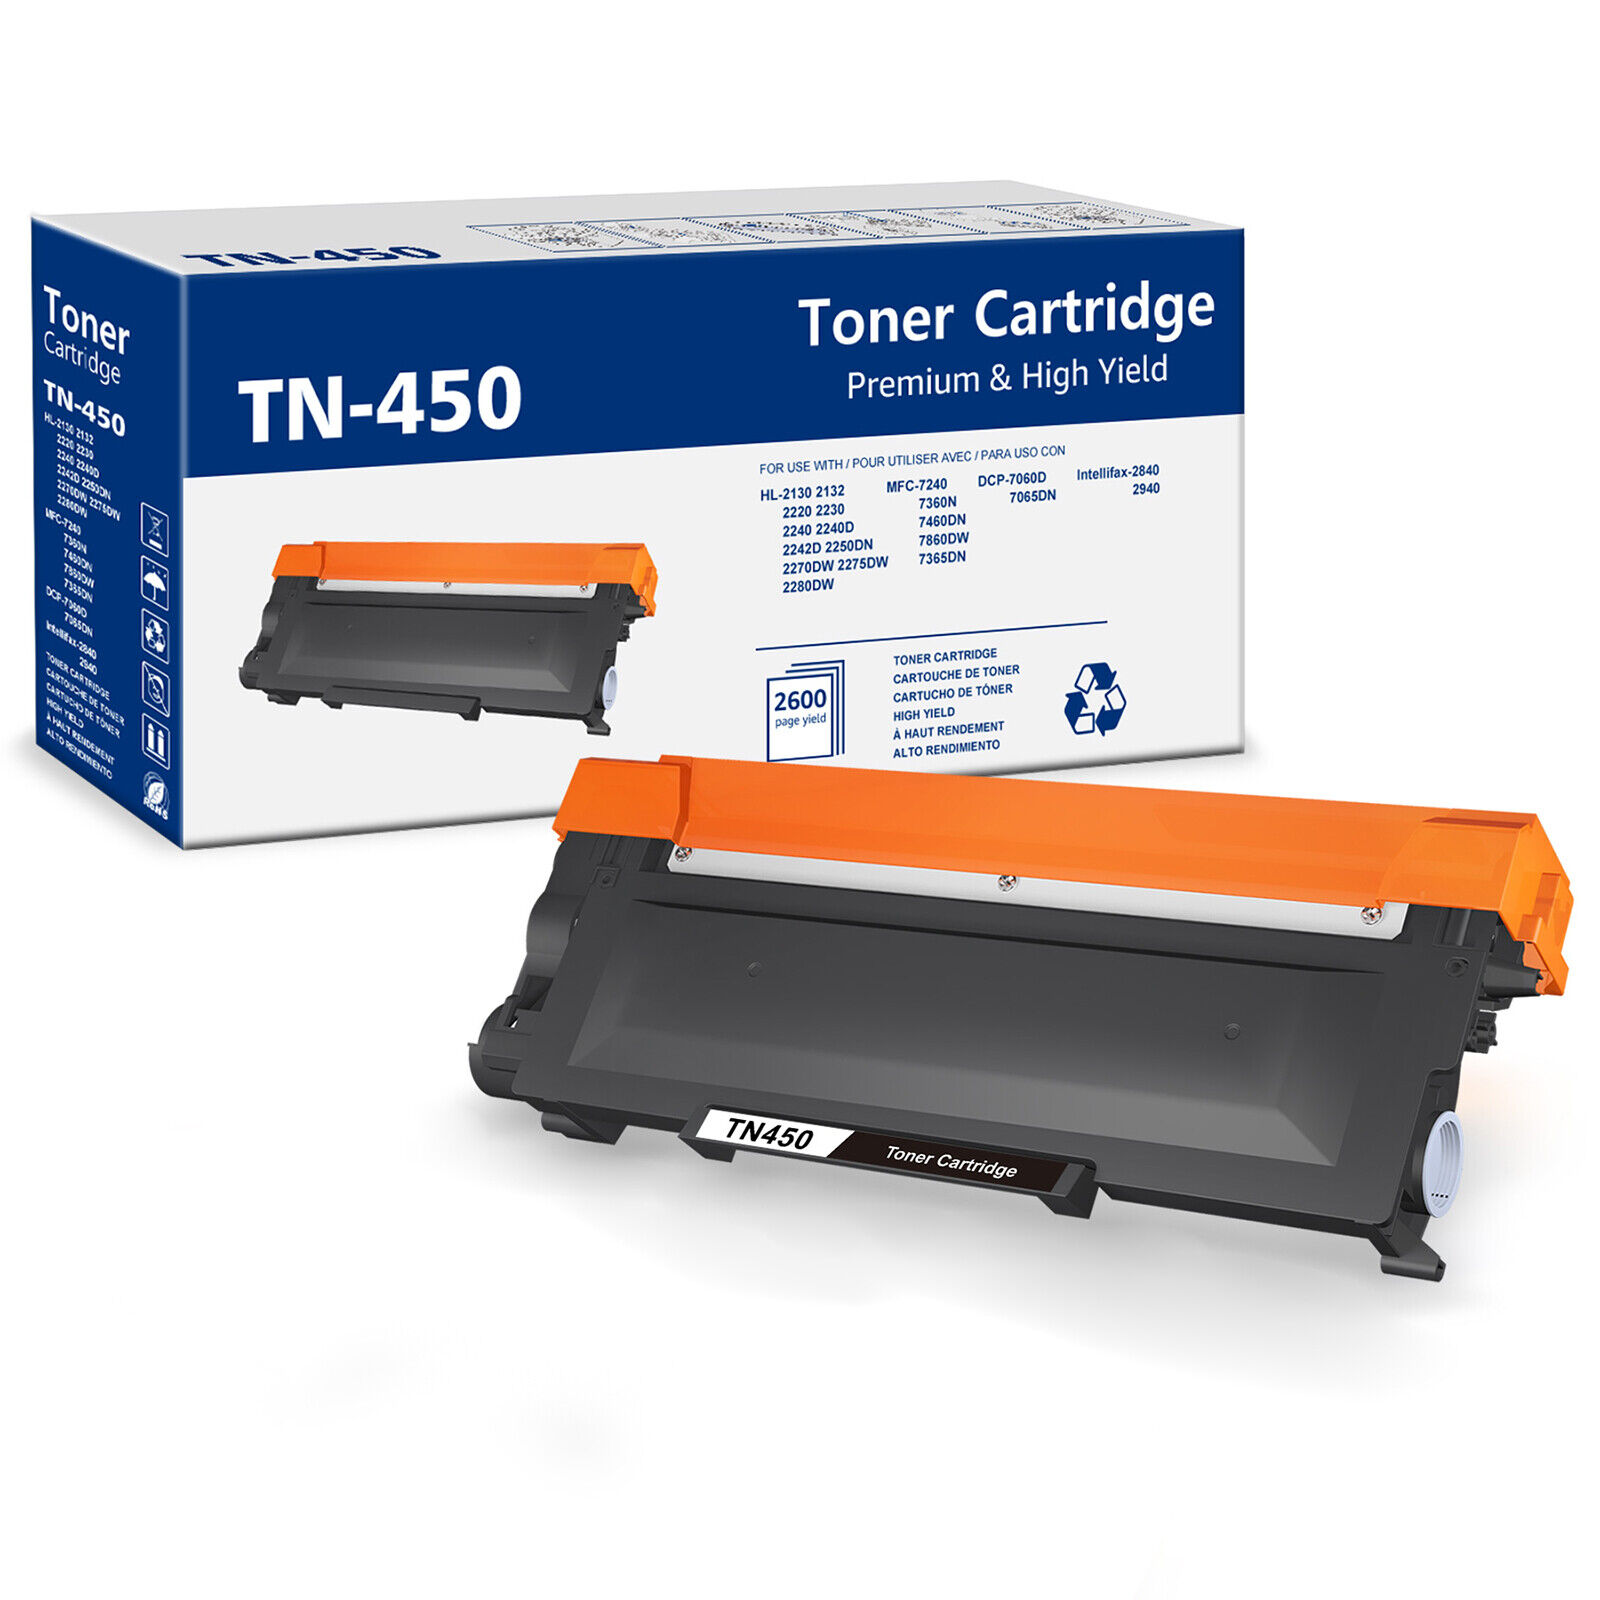 TN450 Toner DR420 Drum High Yield For Brother HL-2130 MFC-7460DN DCP-7055 Lot